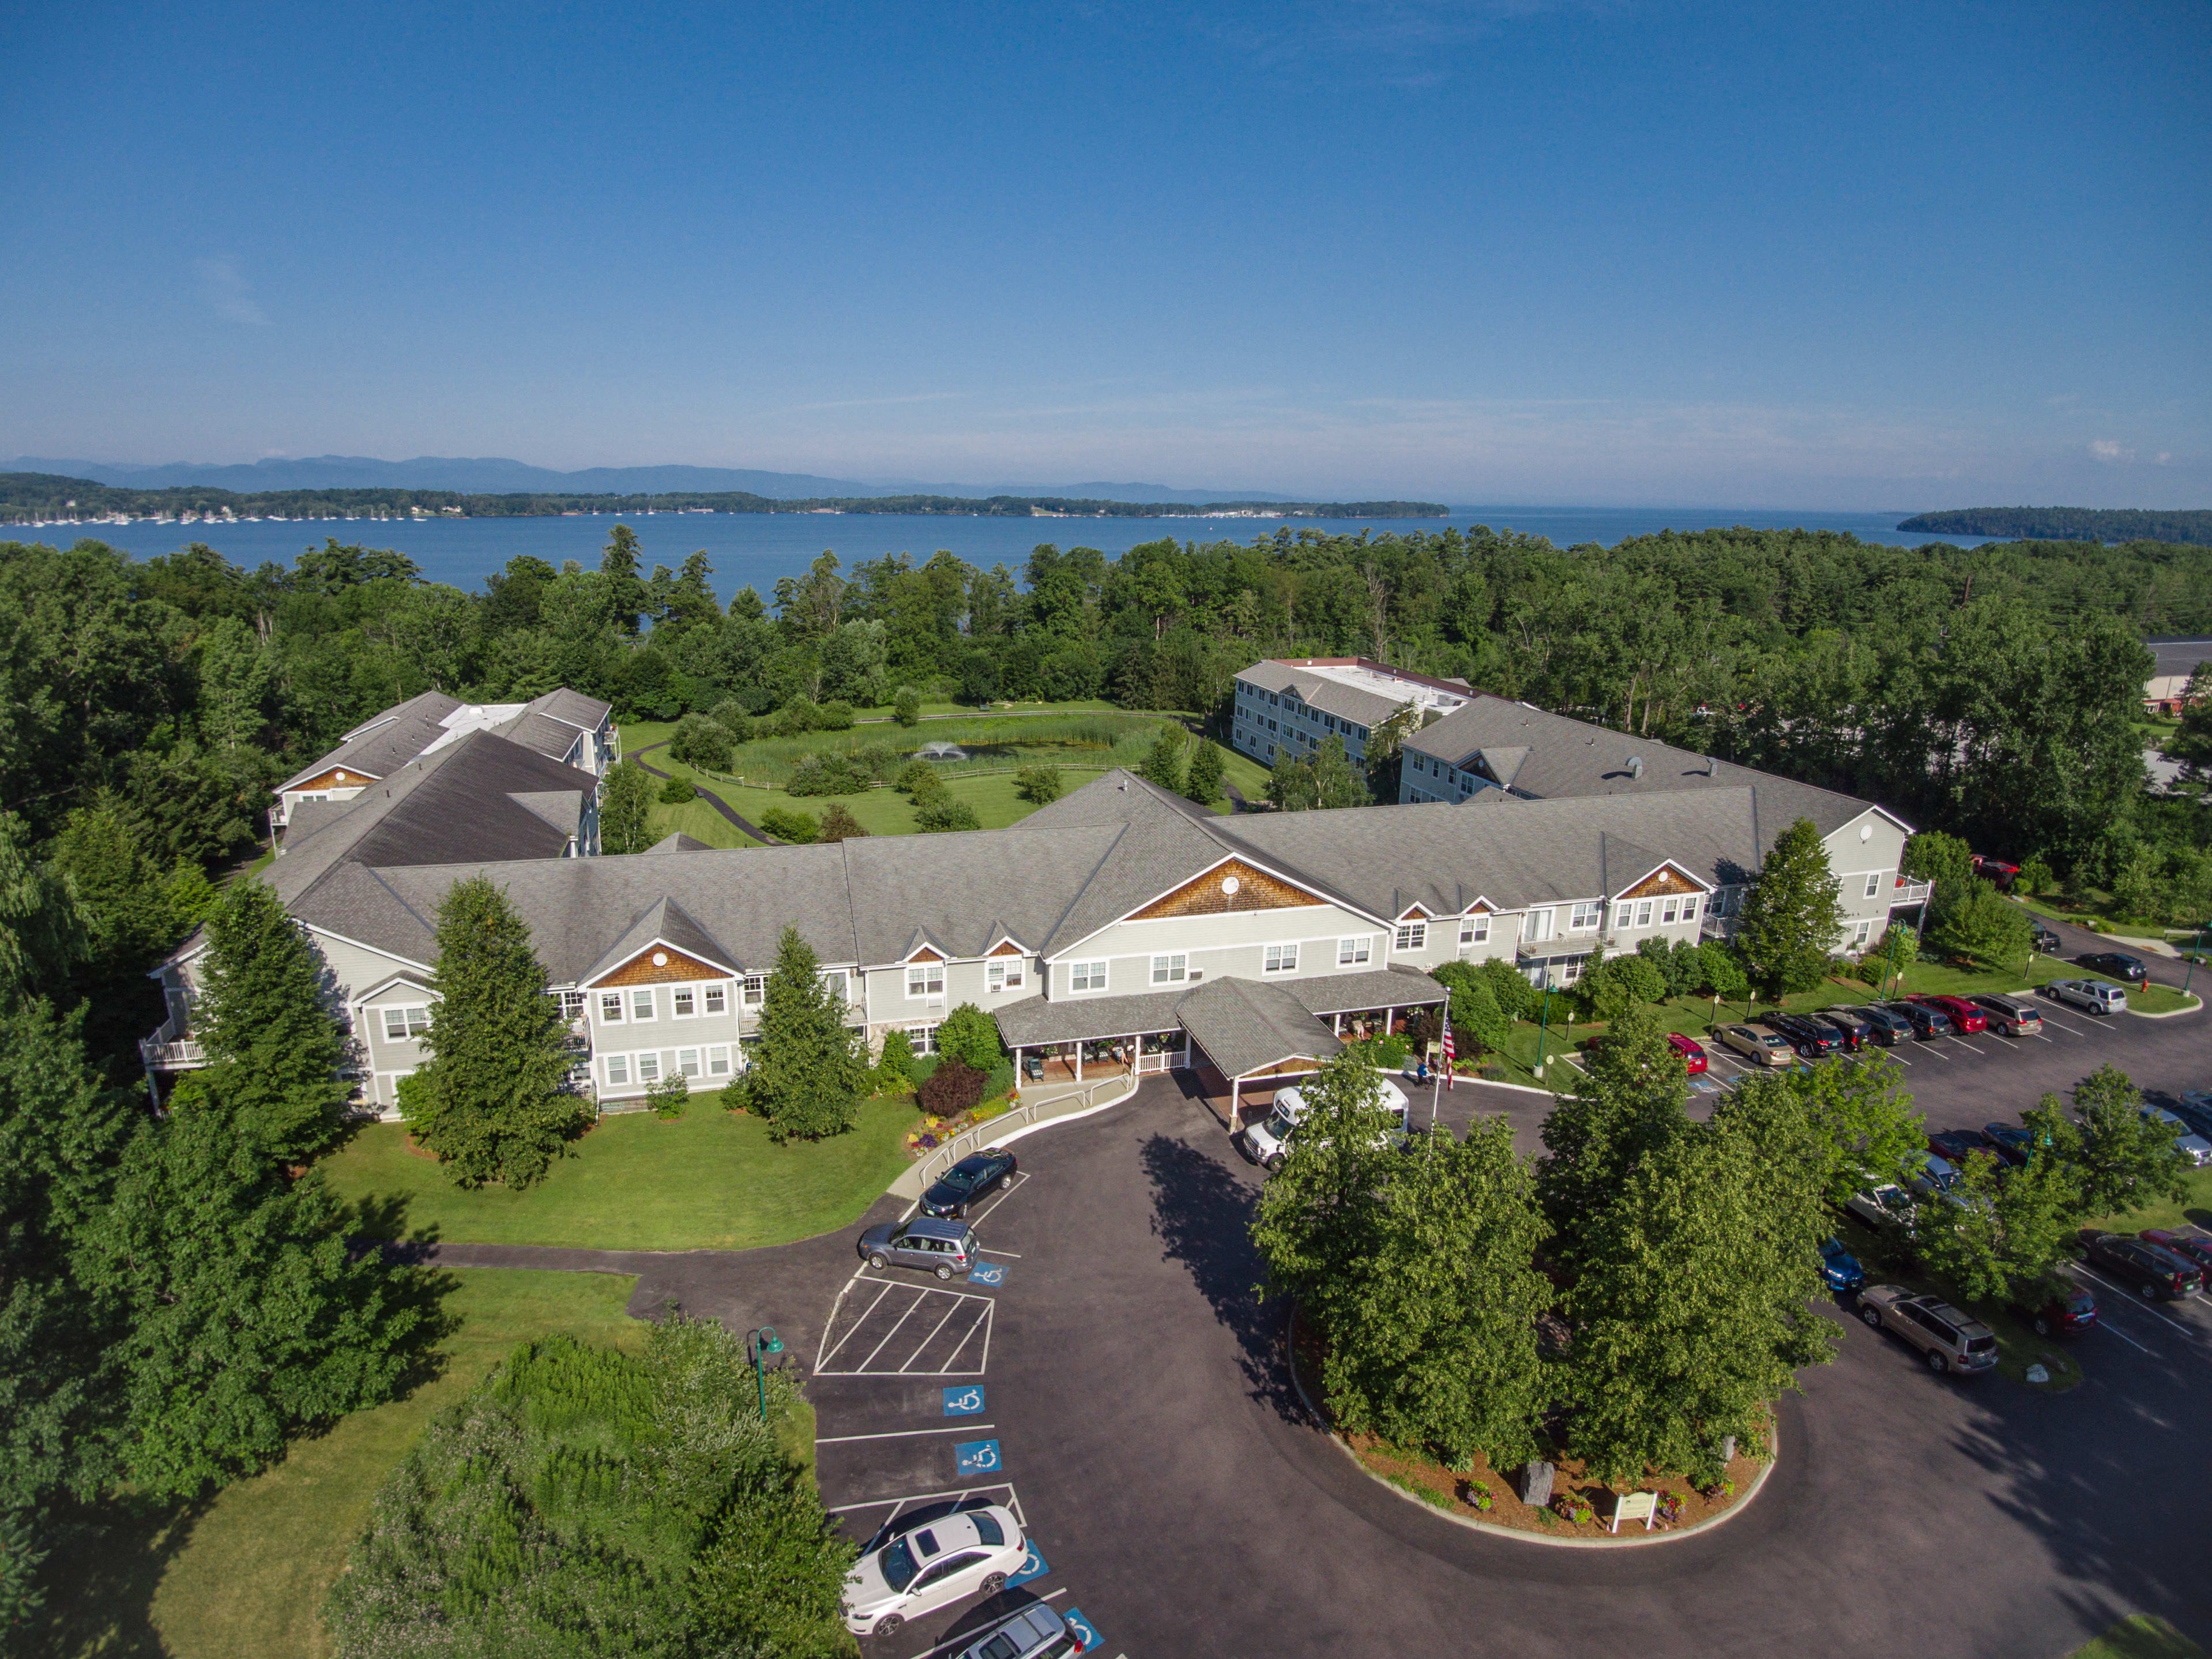 The Residence at Shelburne Bay aerial view of community